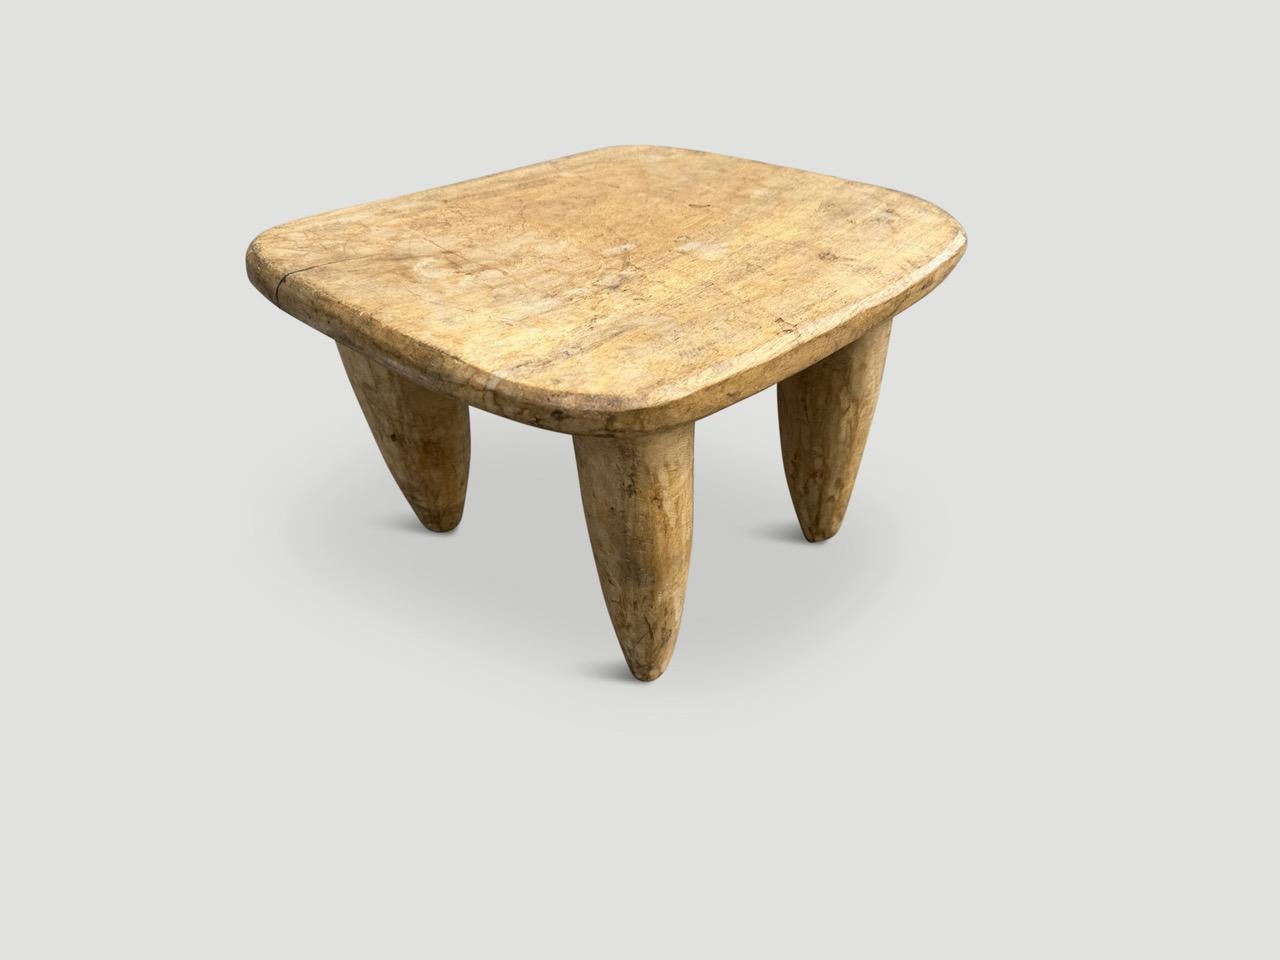 Tribal Andrianna Shamaris Senufo Side Table or Stool From Côte d’Ivoire For Sale